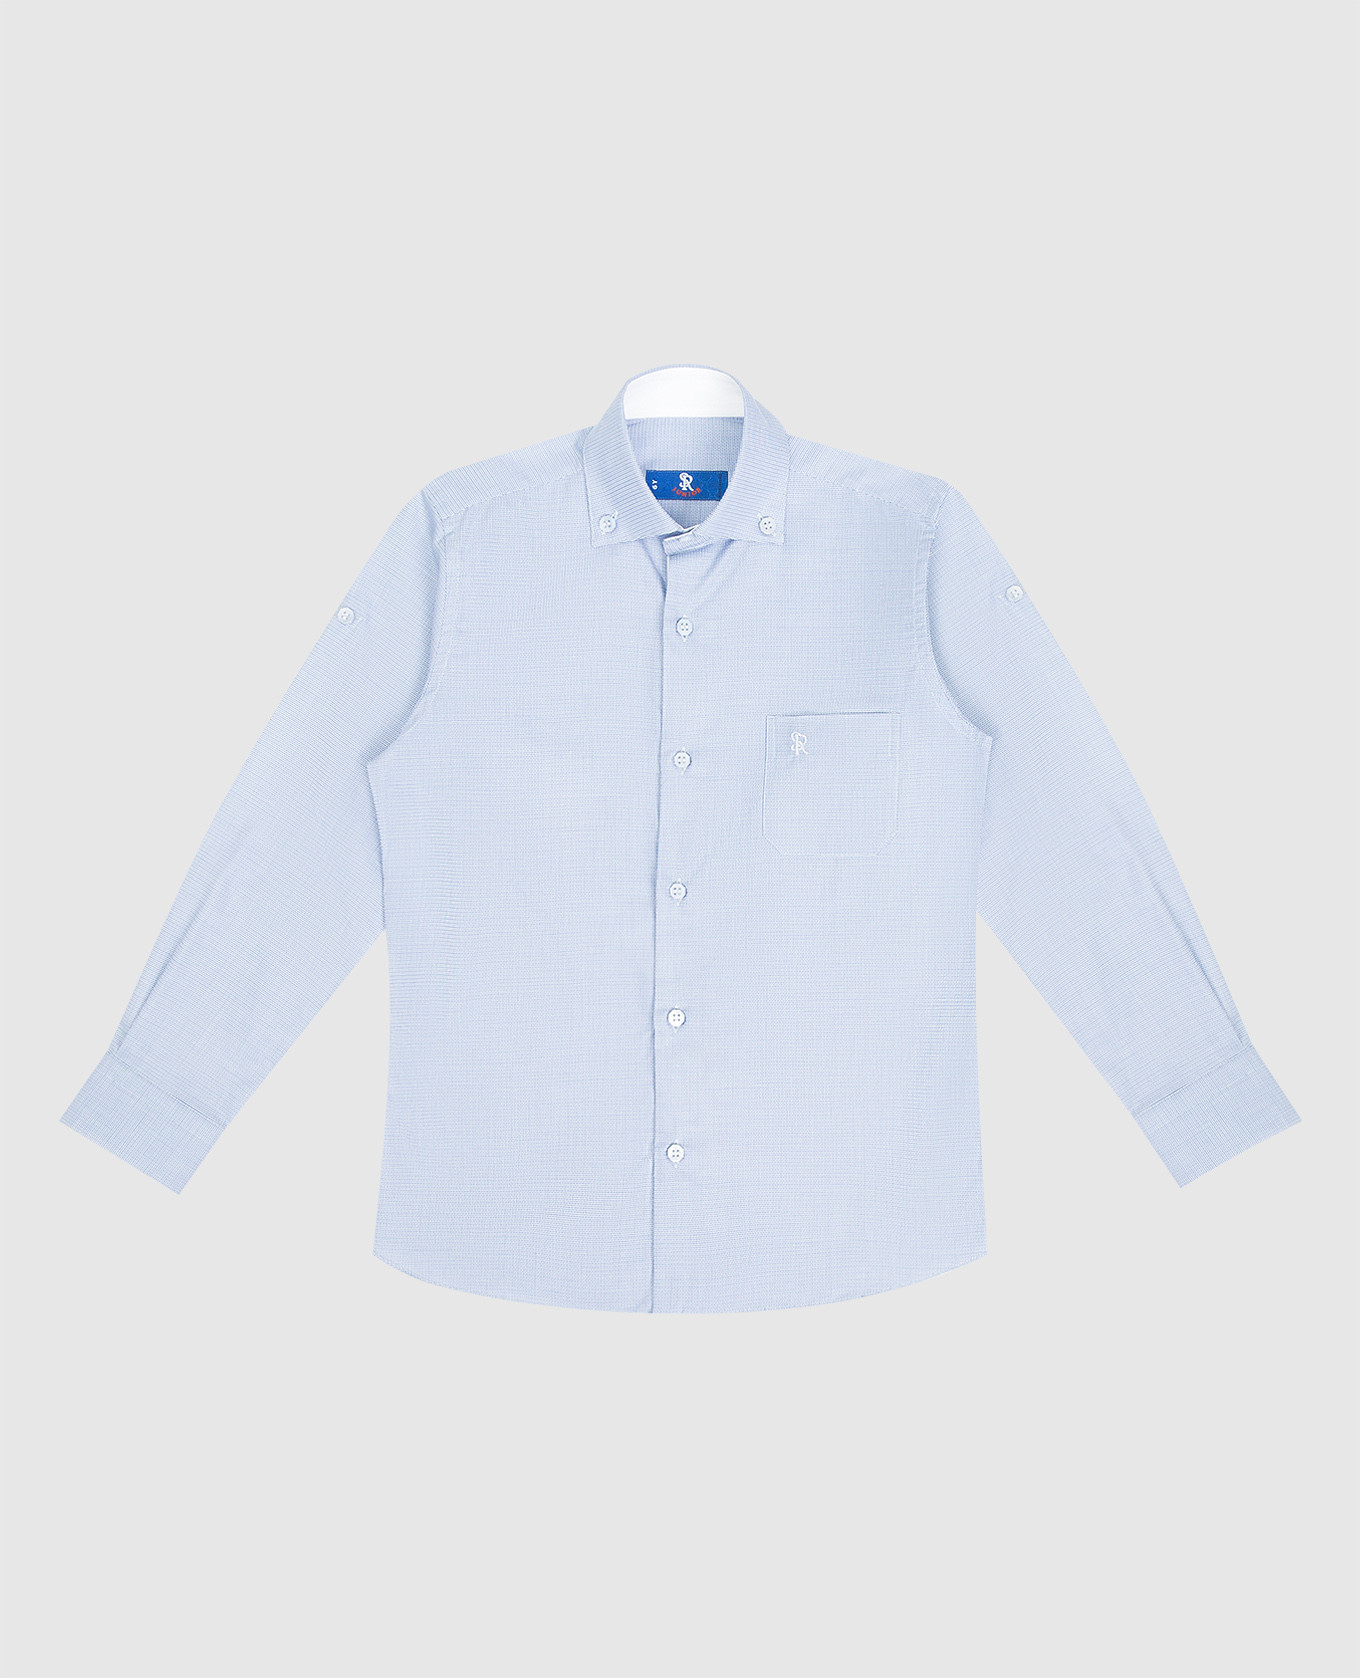 Children's light blue shirt in woven pattern with logo embroidery